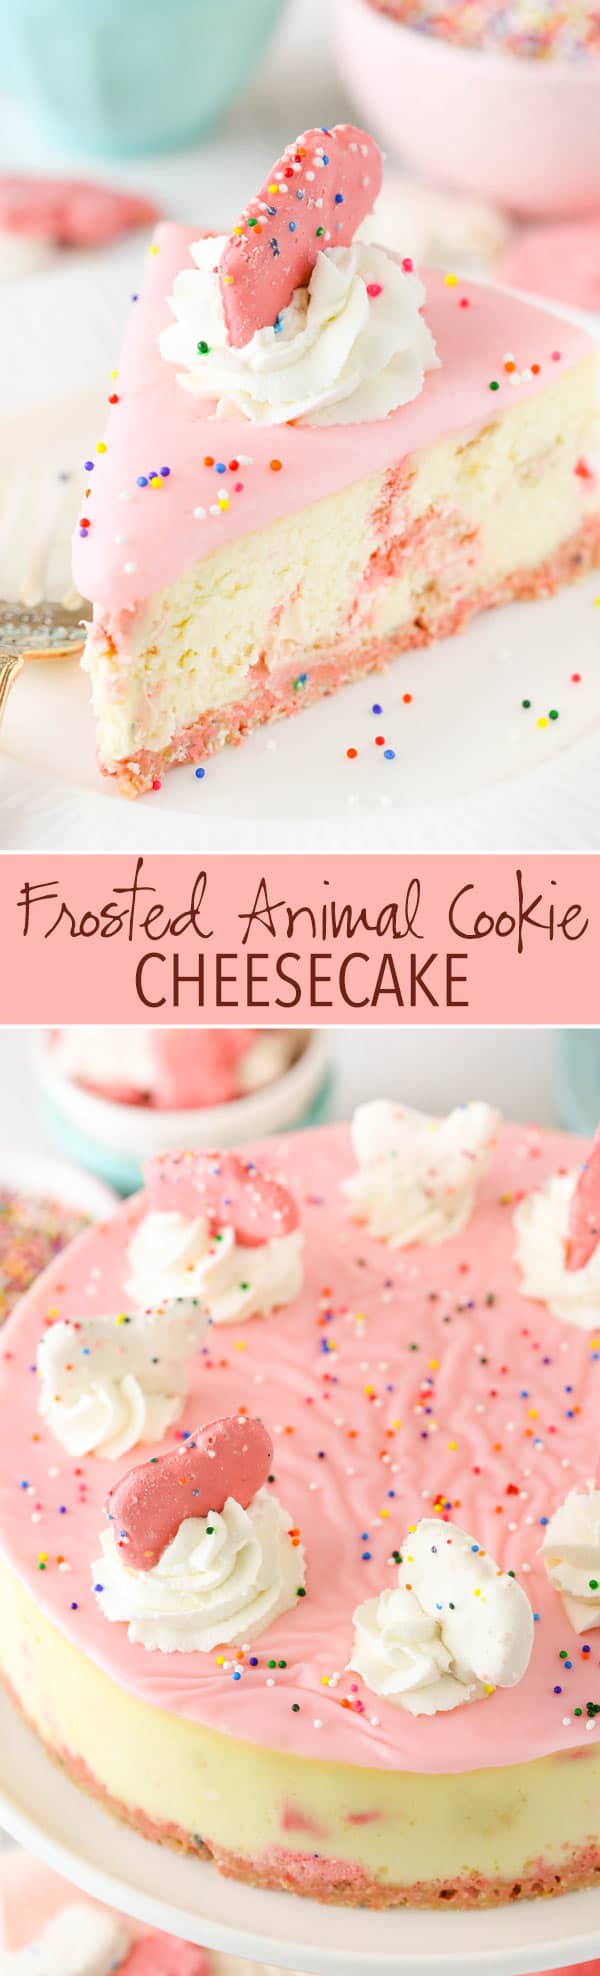 Frosted Animal Cookie Cheesecake - thick and cream vanilla cheesecake with frosted animal cookies in the crust and the filling! So good!